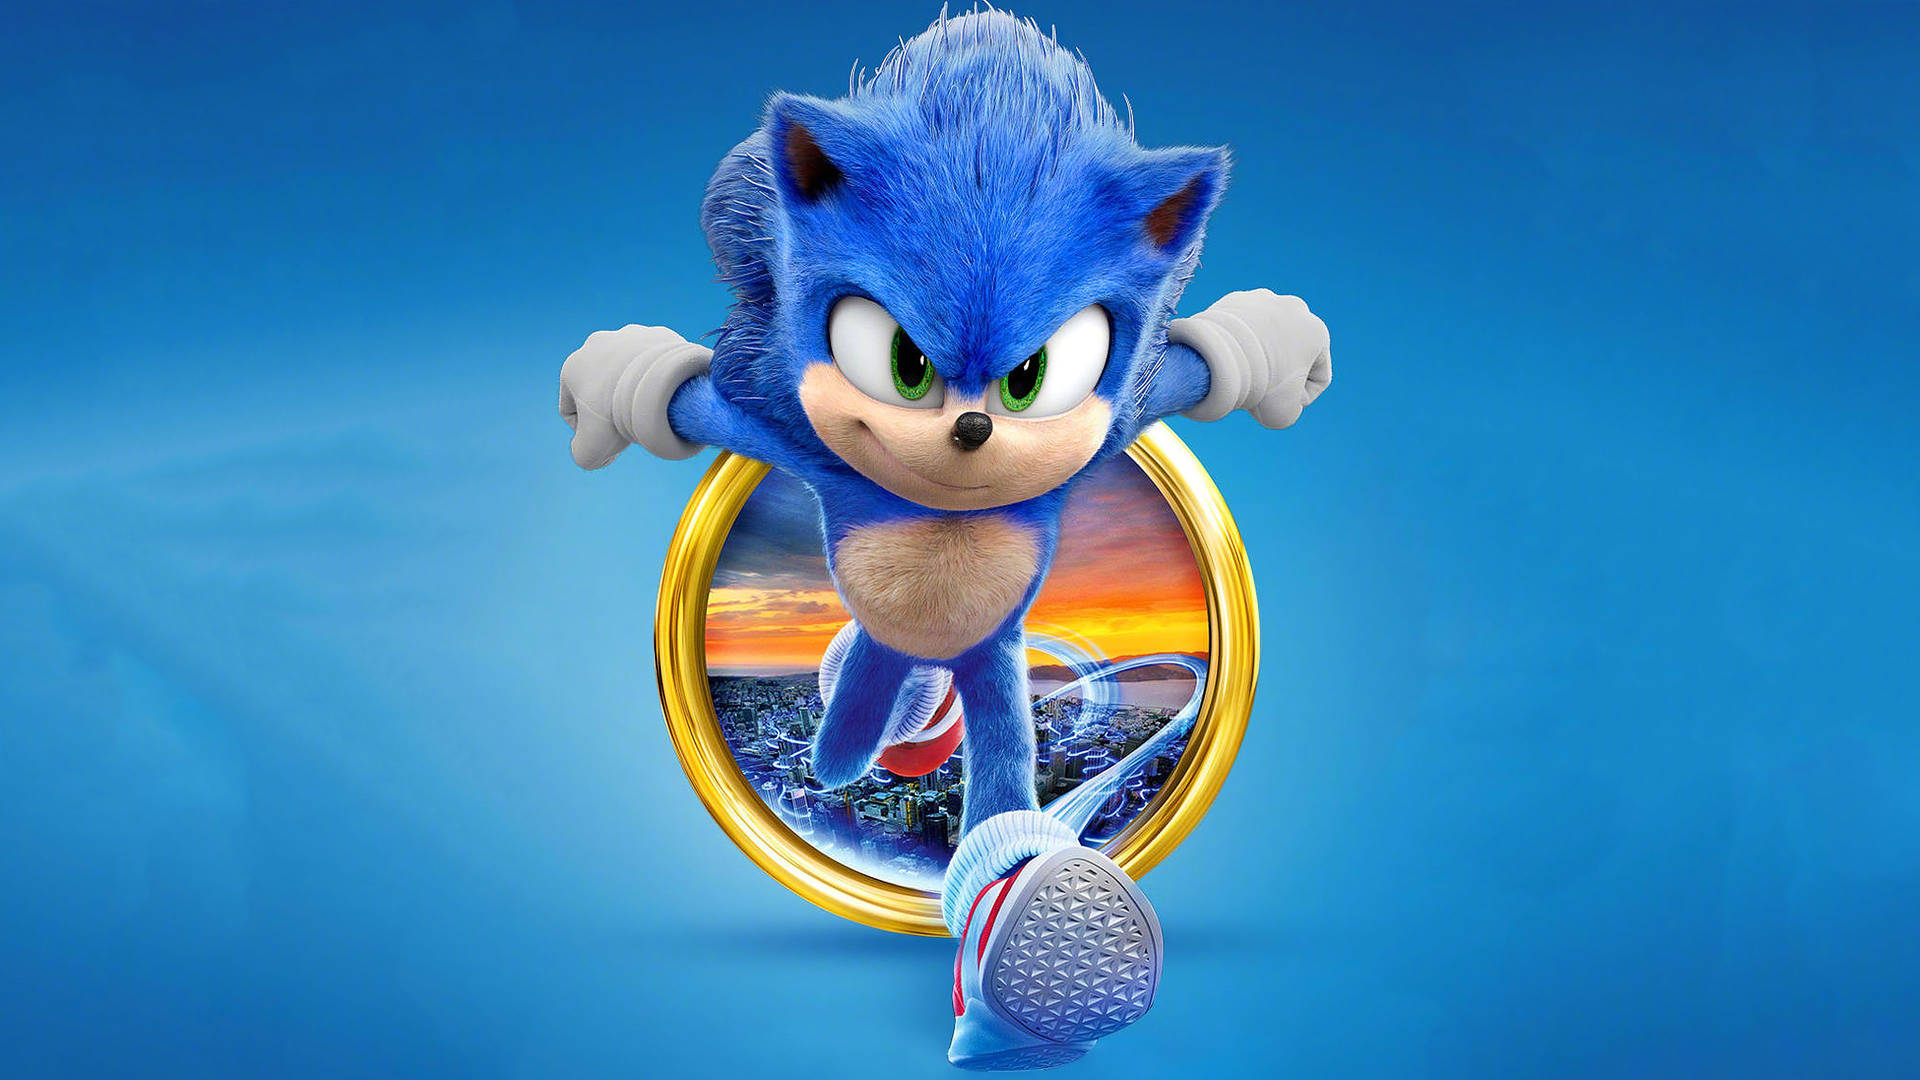 Sonic The Hedgehog's Dash For A Golden Ring